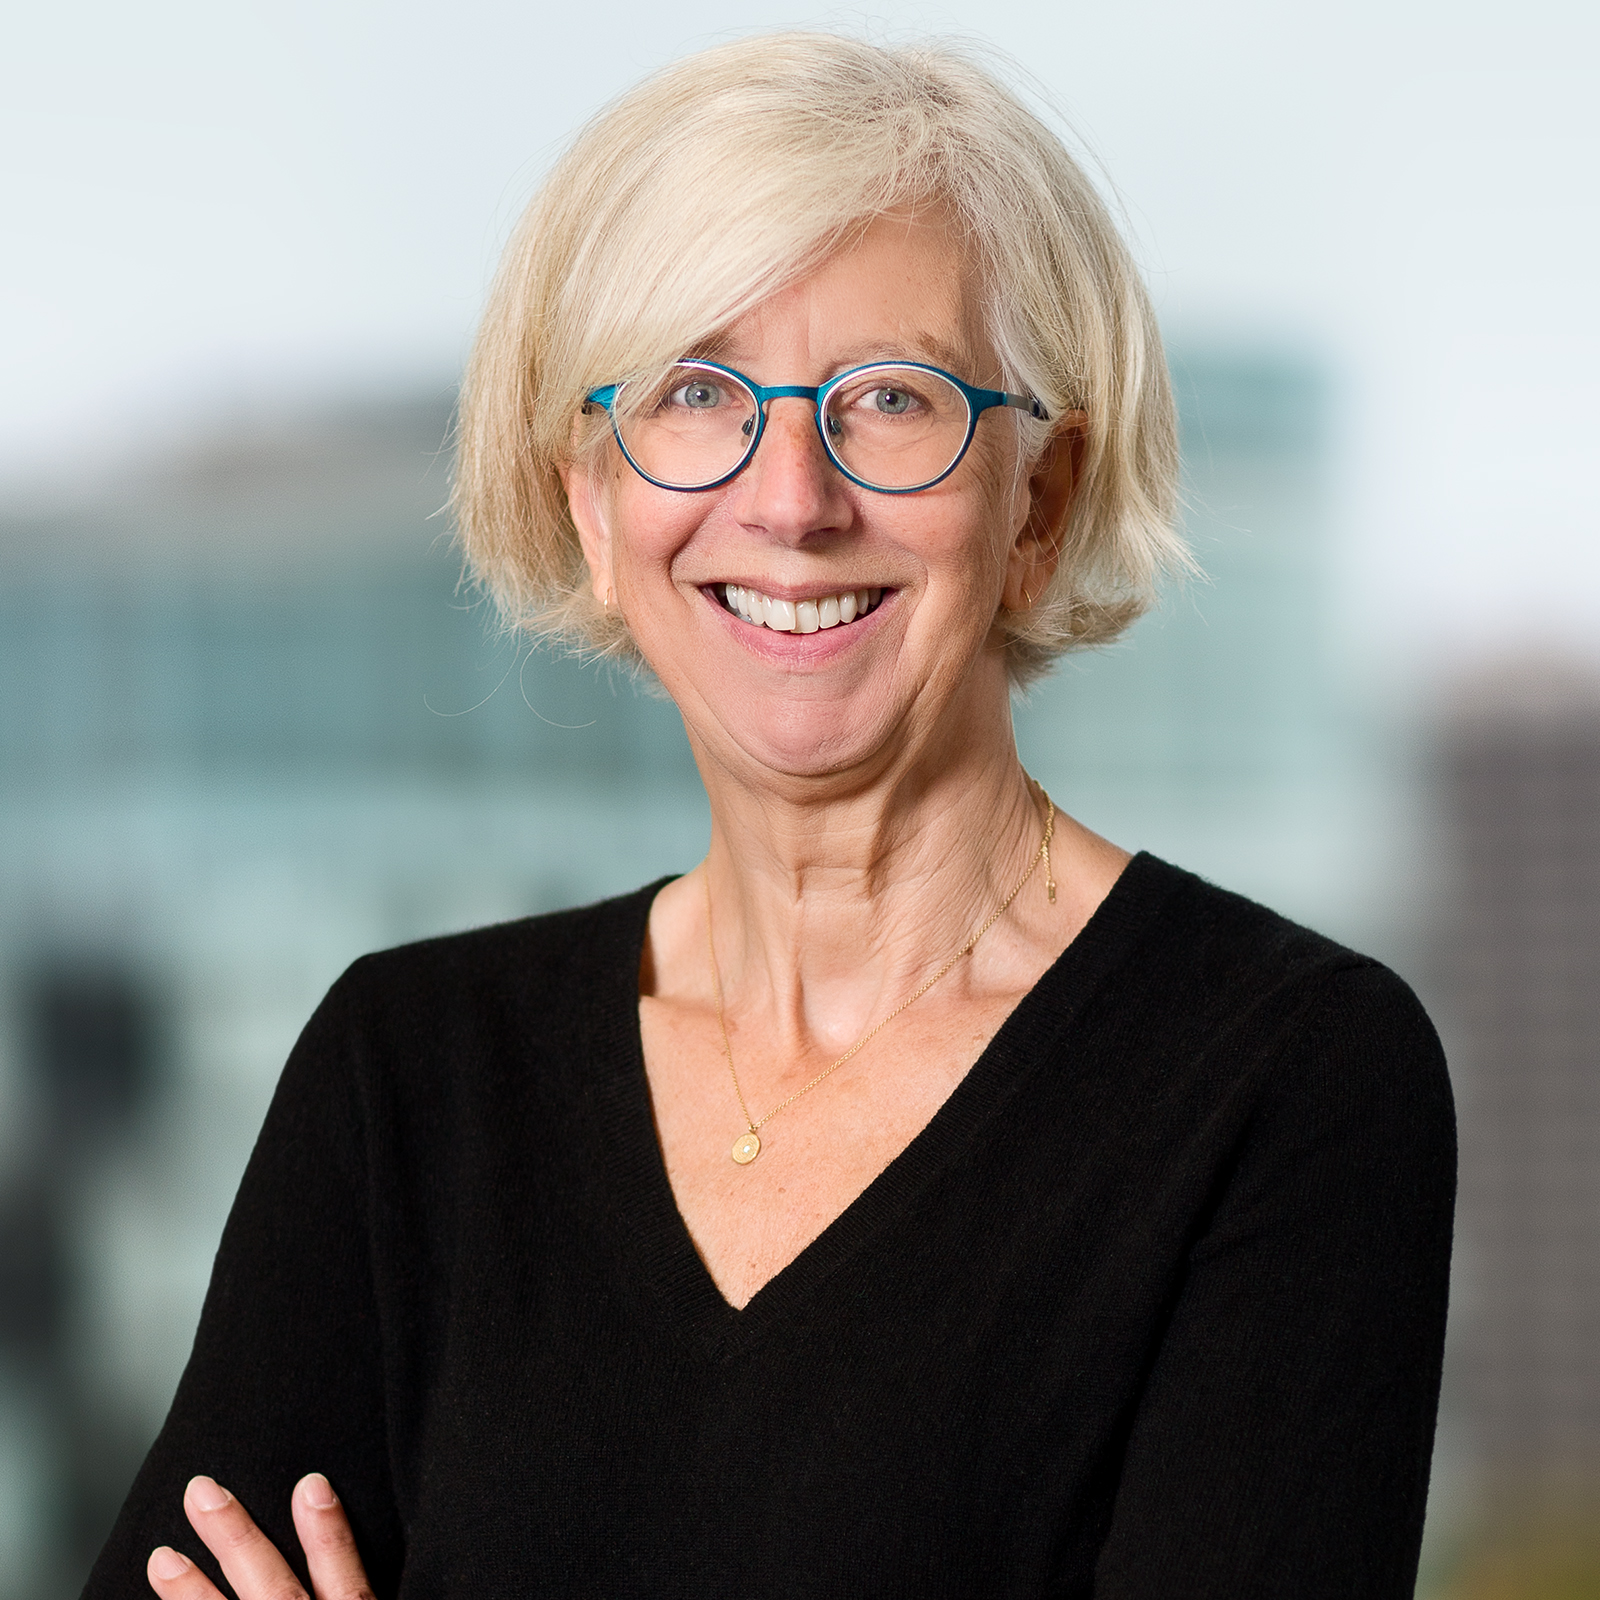 A photograph of a white woman with white hair cut into a bob and glasses, wearing a black shirt. The portrait is a business headshot of Monica Heller, president of CASCA.